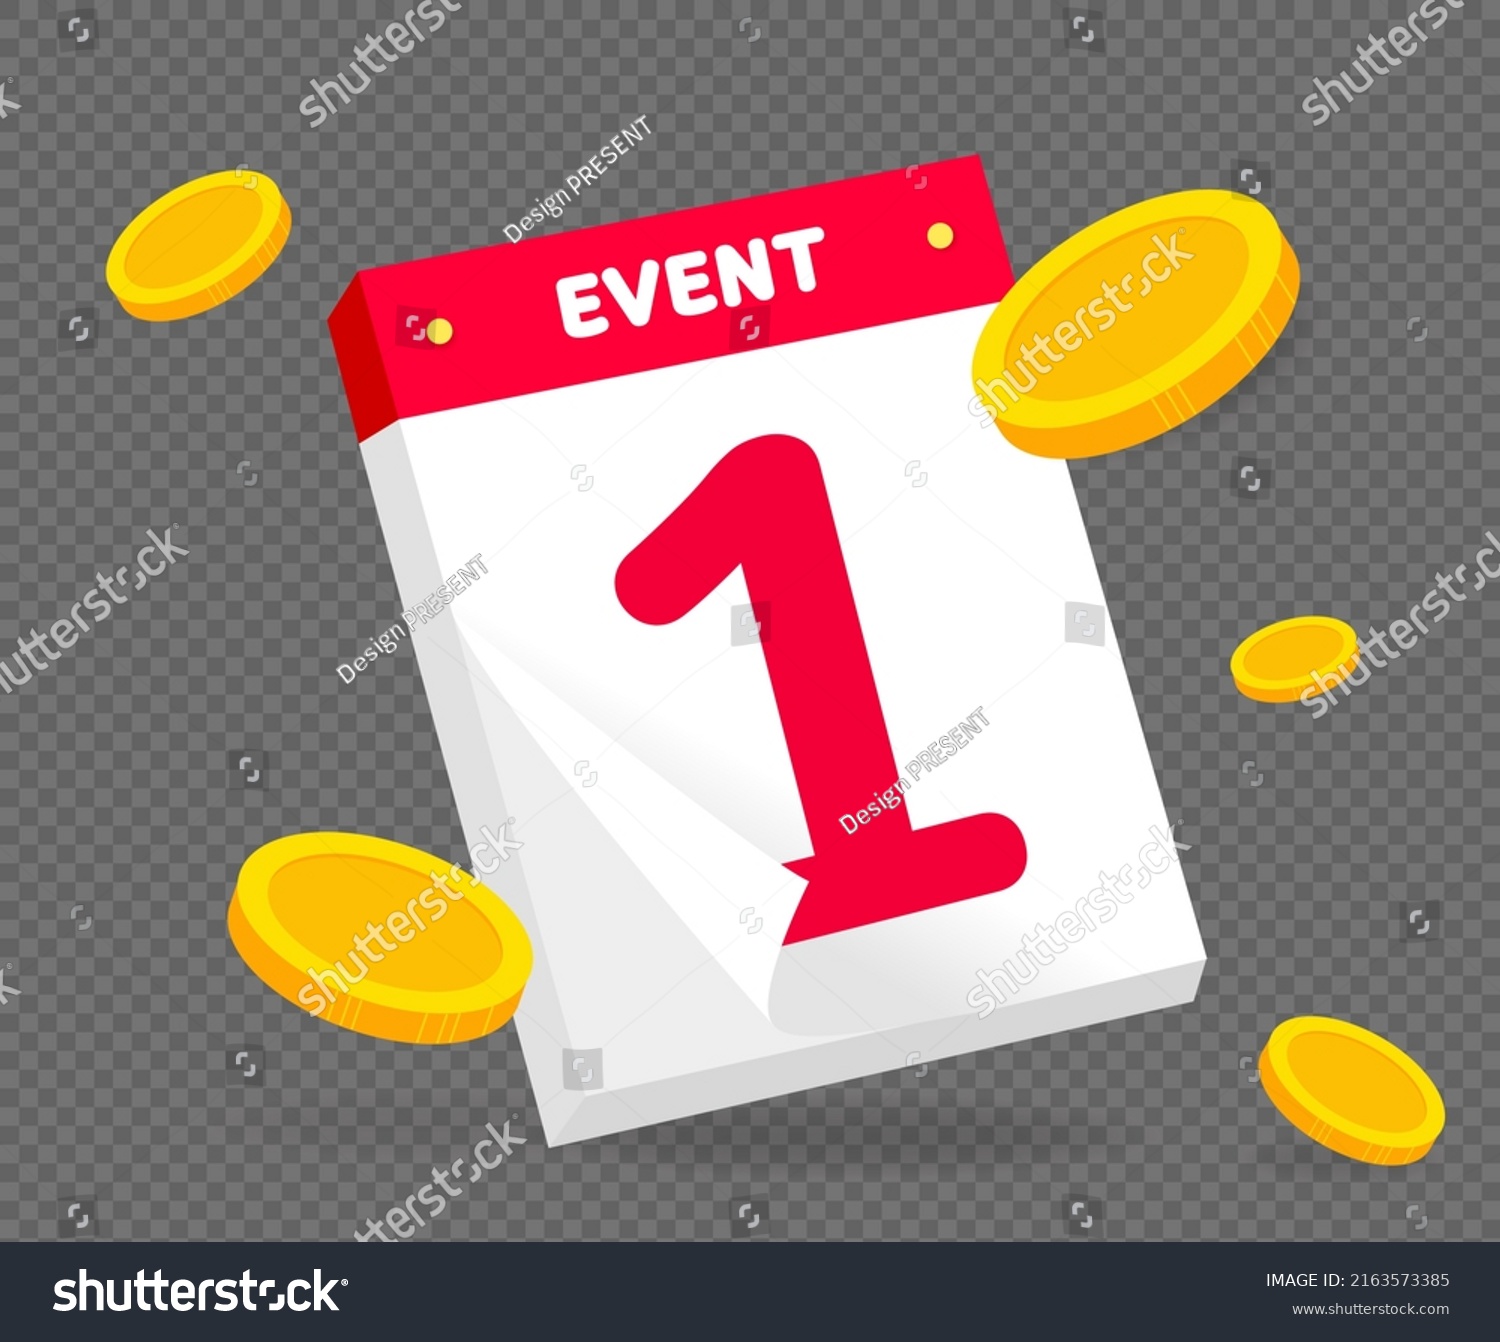 Calendar Pages Coin Collections Events Illustration Stock Vector